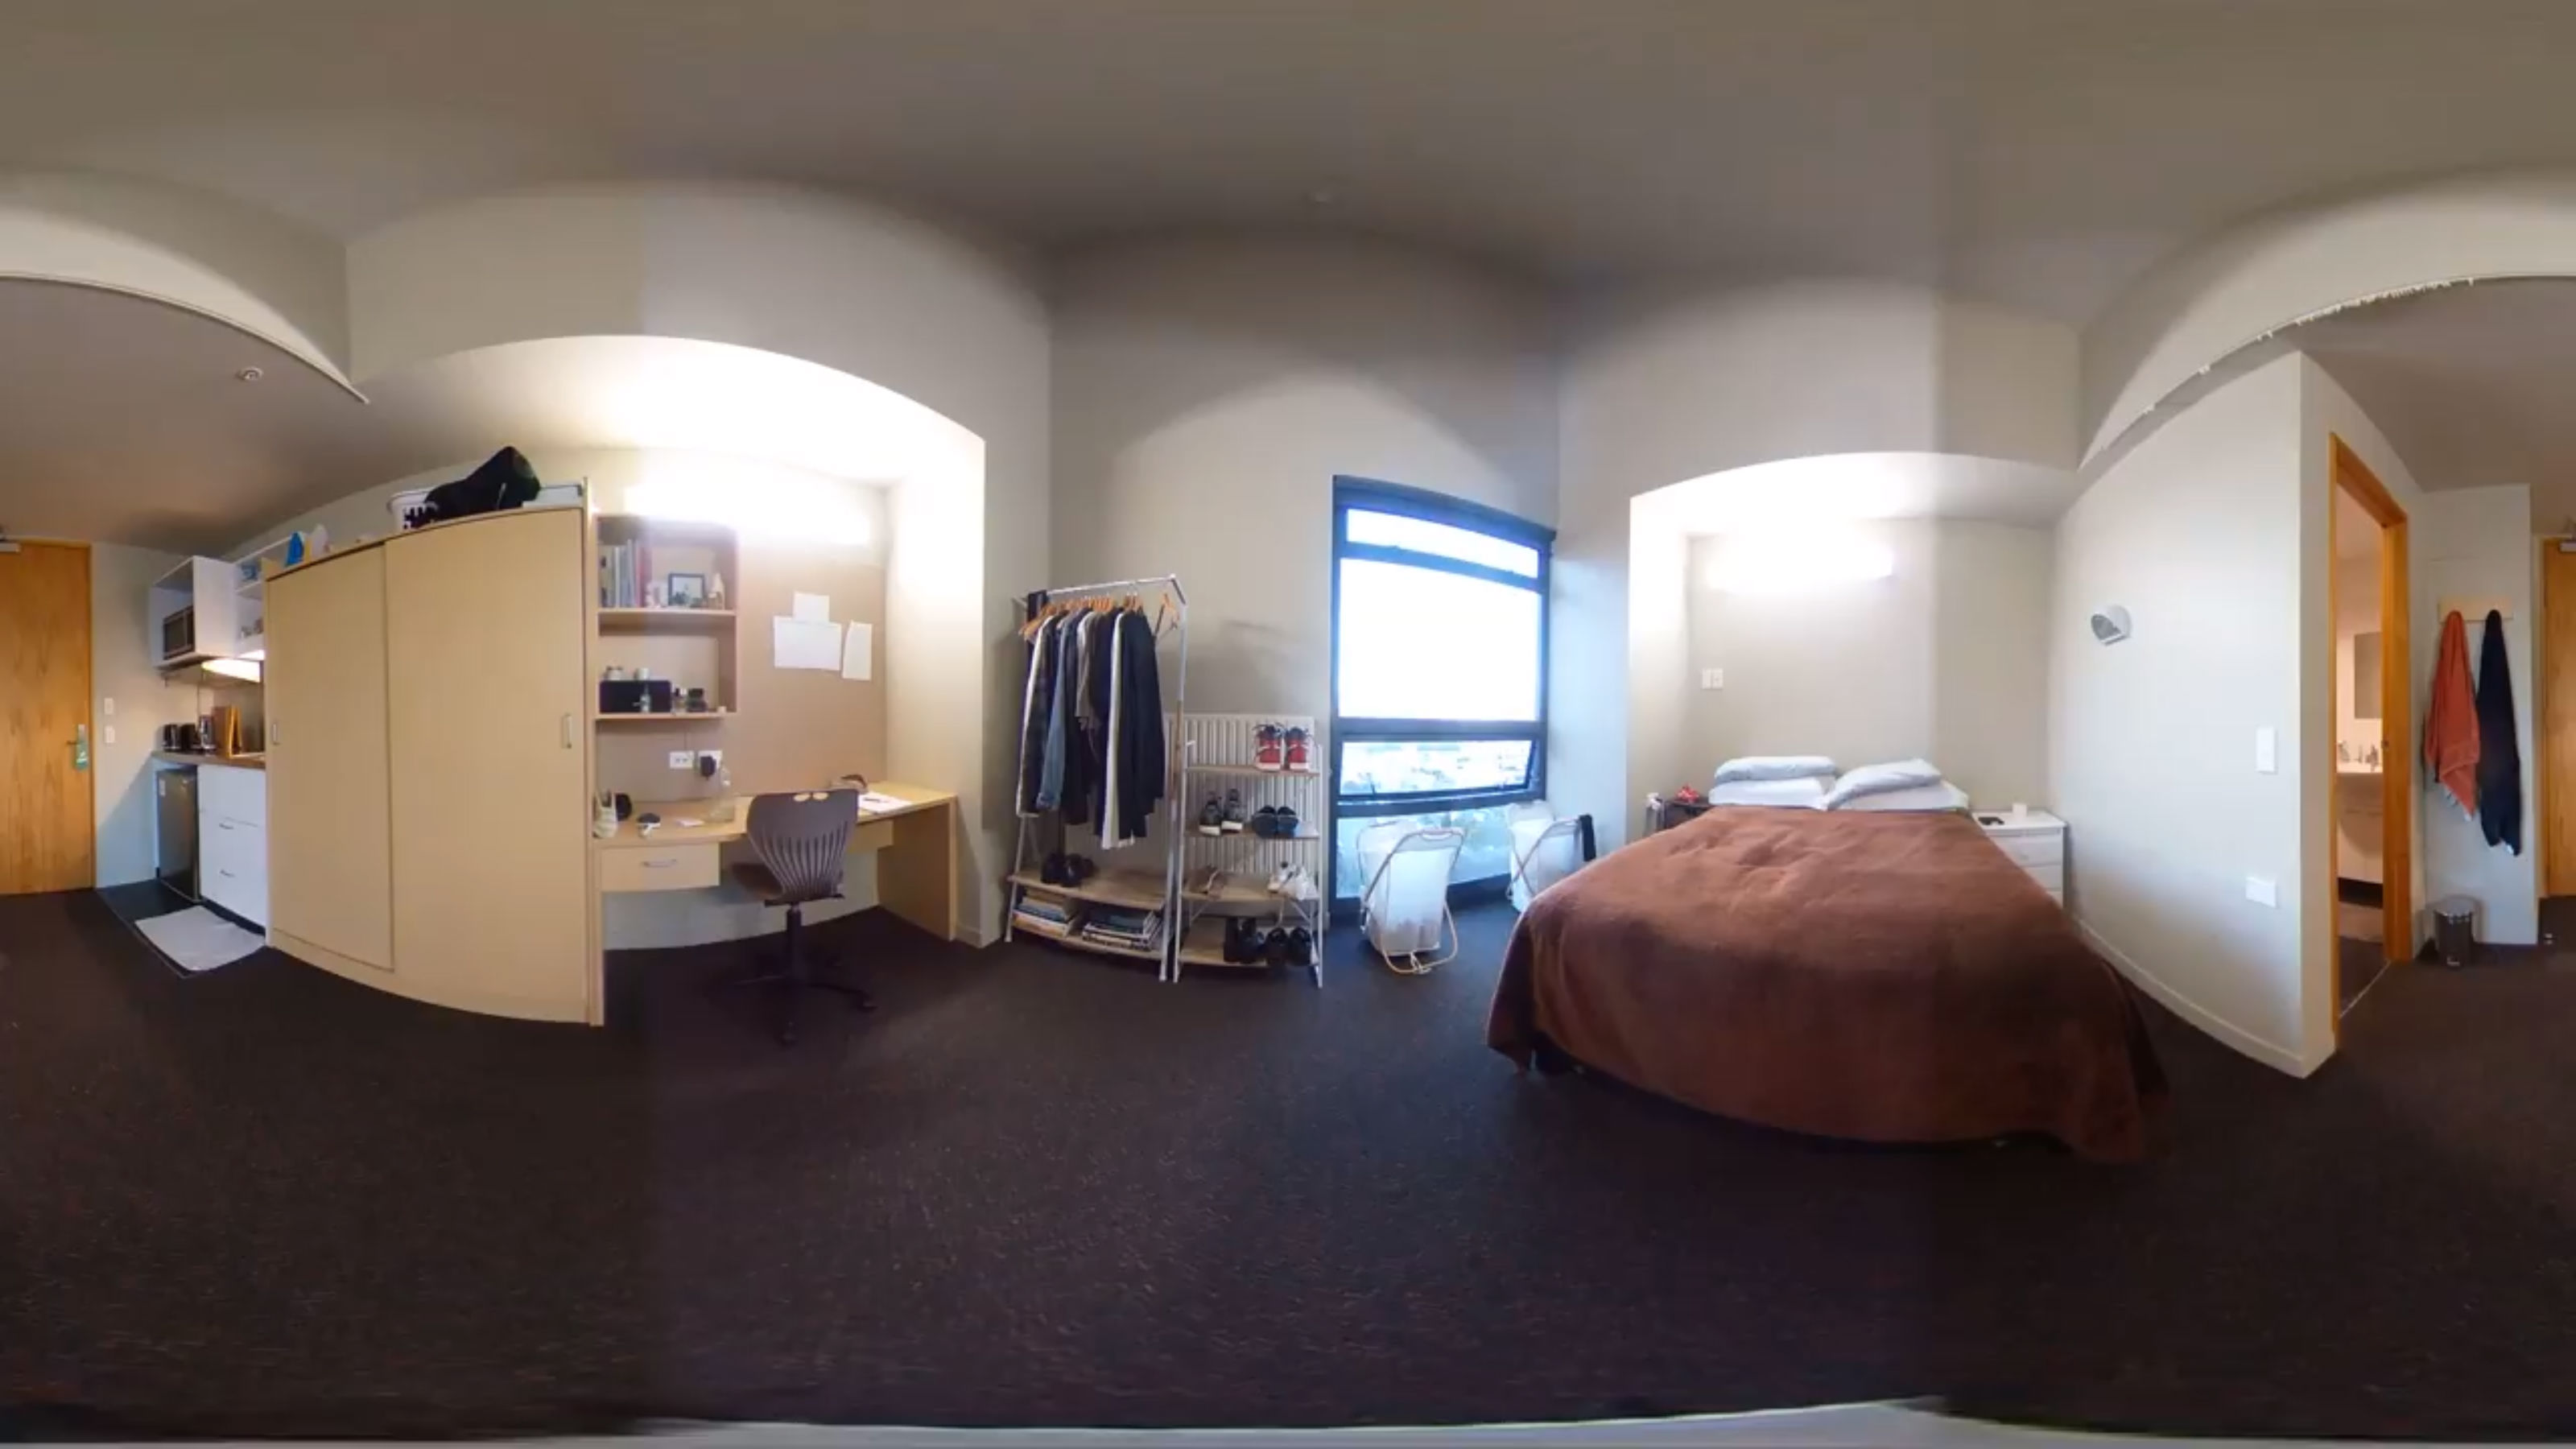 A panoramic view of an occupied bedroom with am ensuite, desk, double bed, and kitchenette.